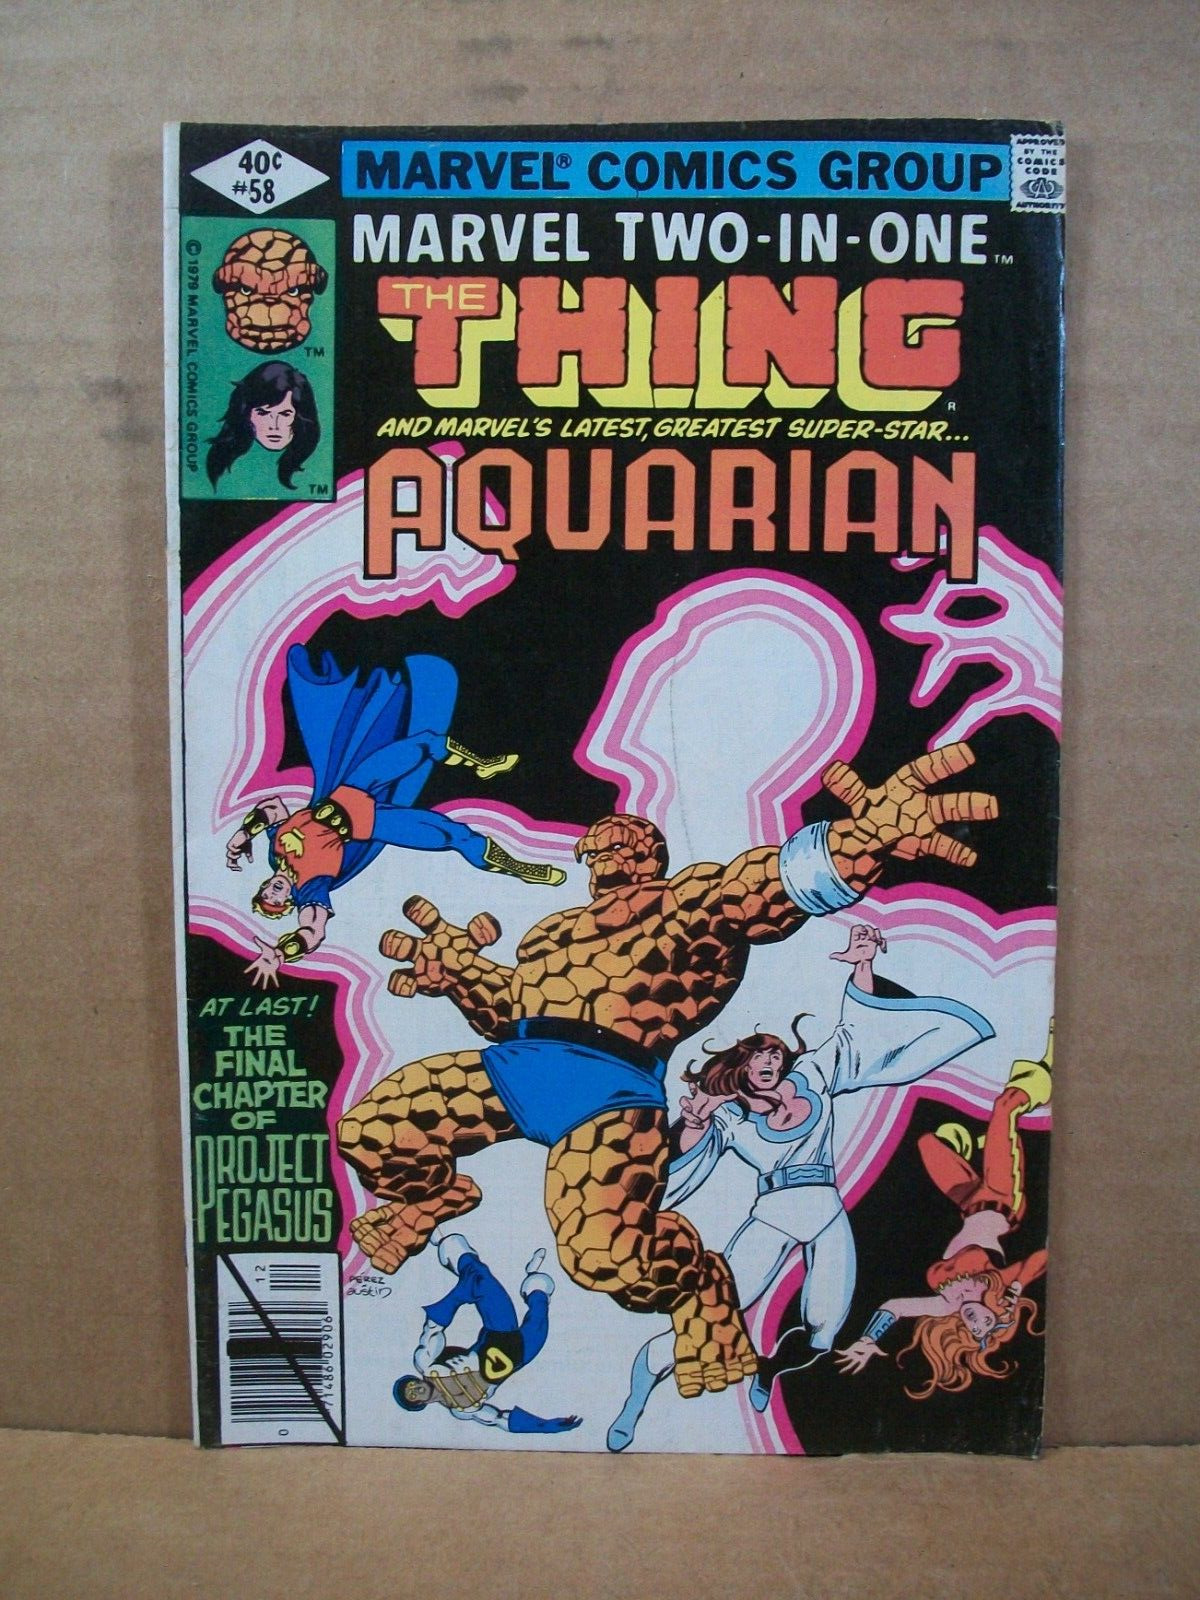 Marvel Two-In-One #58 - The Thing and Aquarian (Dec 1979) FN+